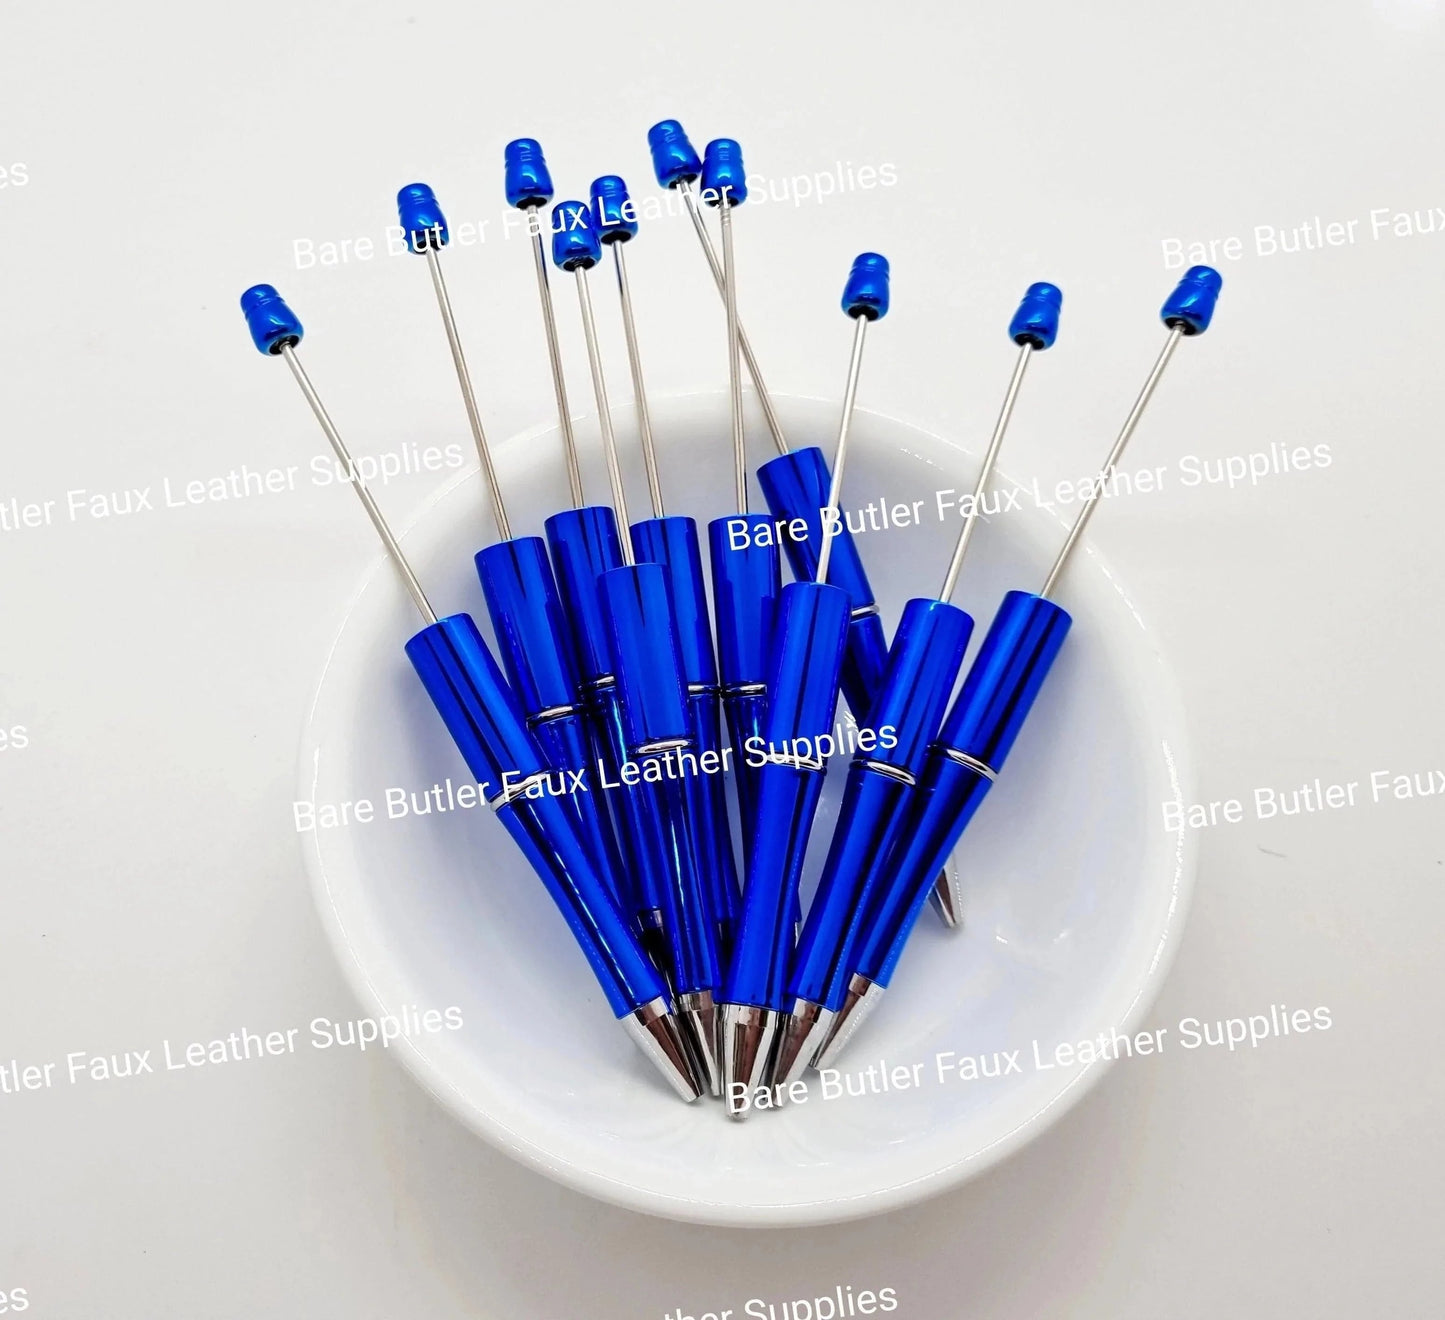 Royal Blue Metallic Bead Pen Blanks 2 pack -  - Bare Butler Faux Leather Supplies 